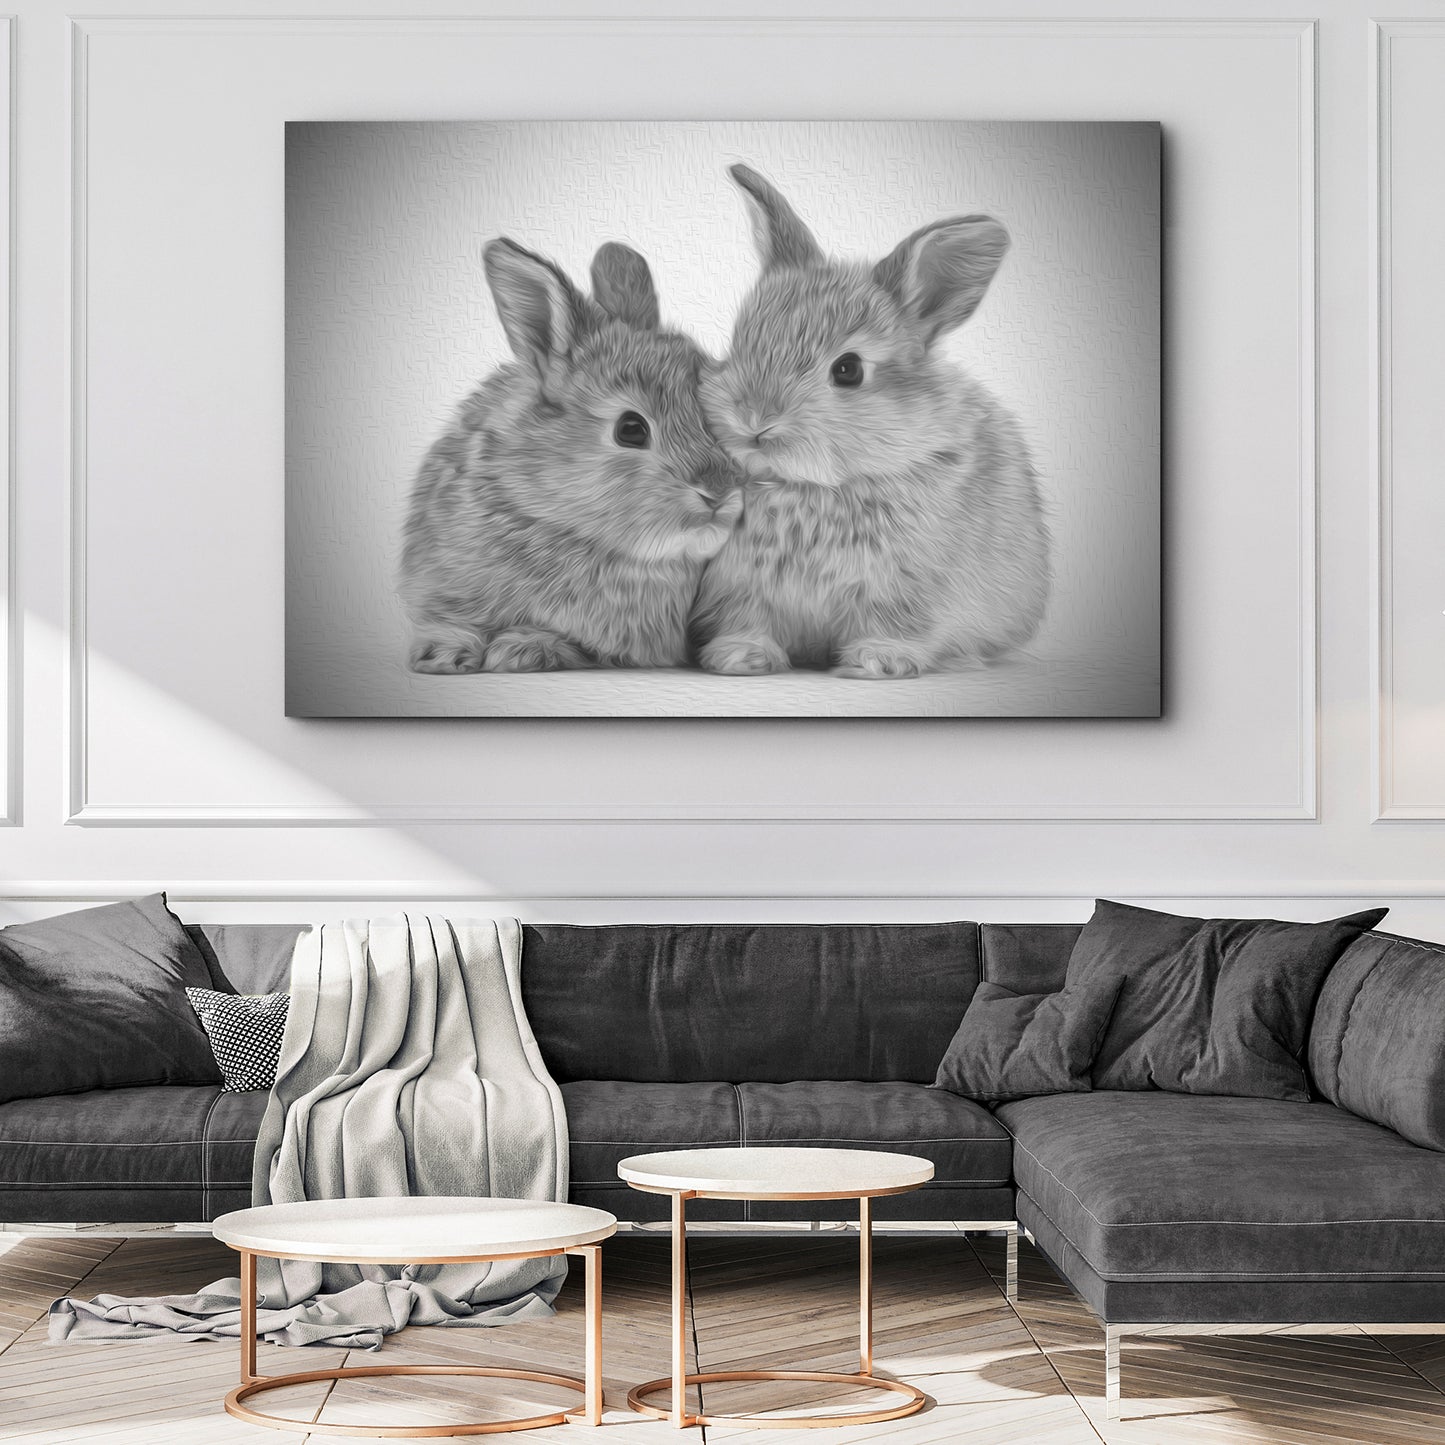 Gray Rabbits Sketch Canvas Wall Art Style 2 - Image by Tailored Canvases